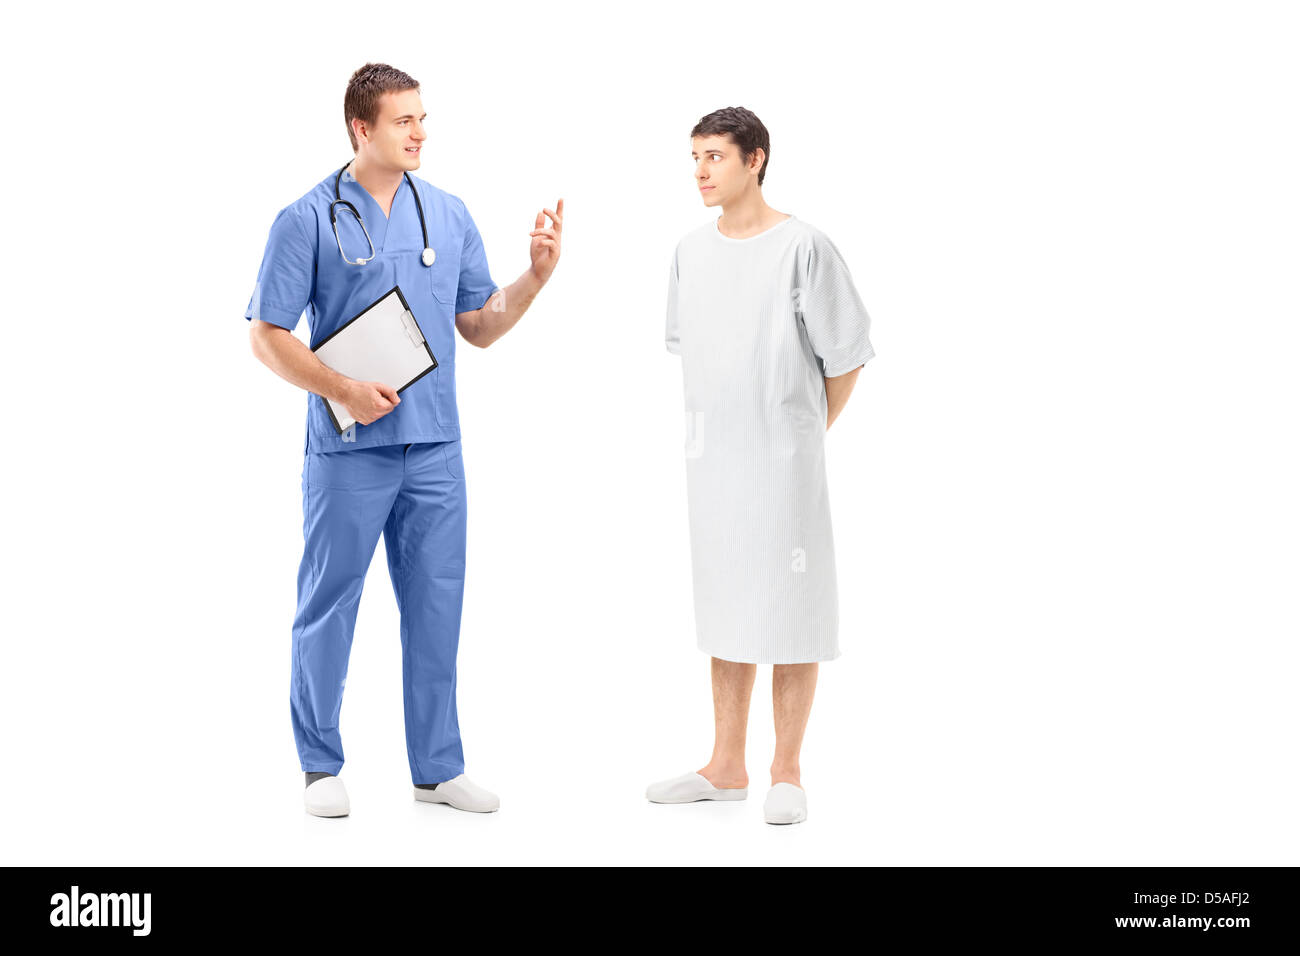 Full length portrait of a male patient in a hospital gown and medical practitioner during a discussion isolated on white Stock Photo